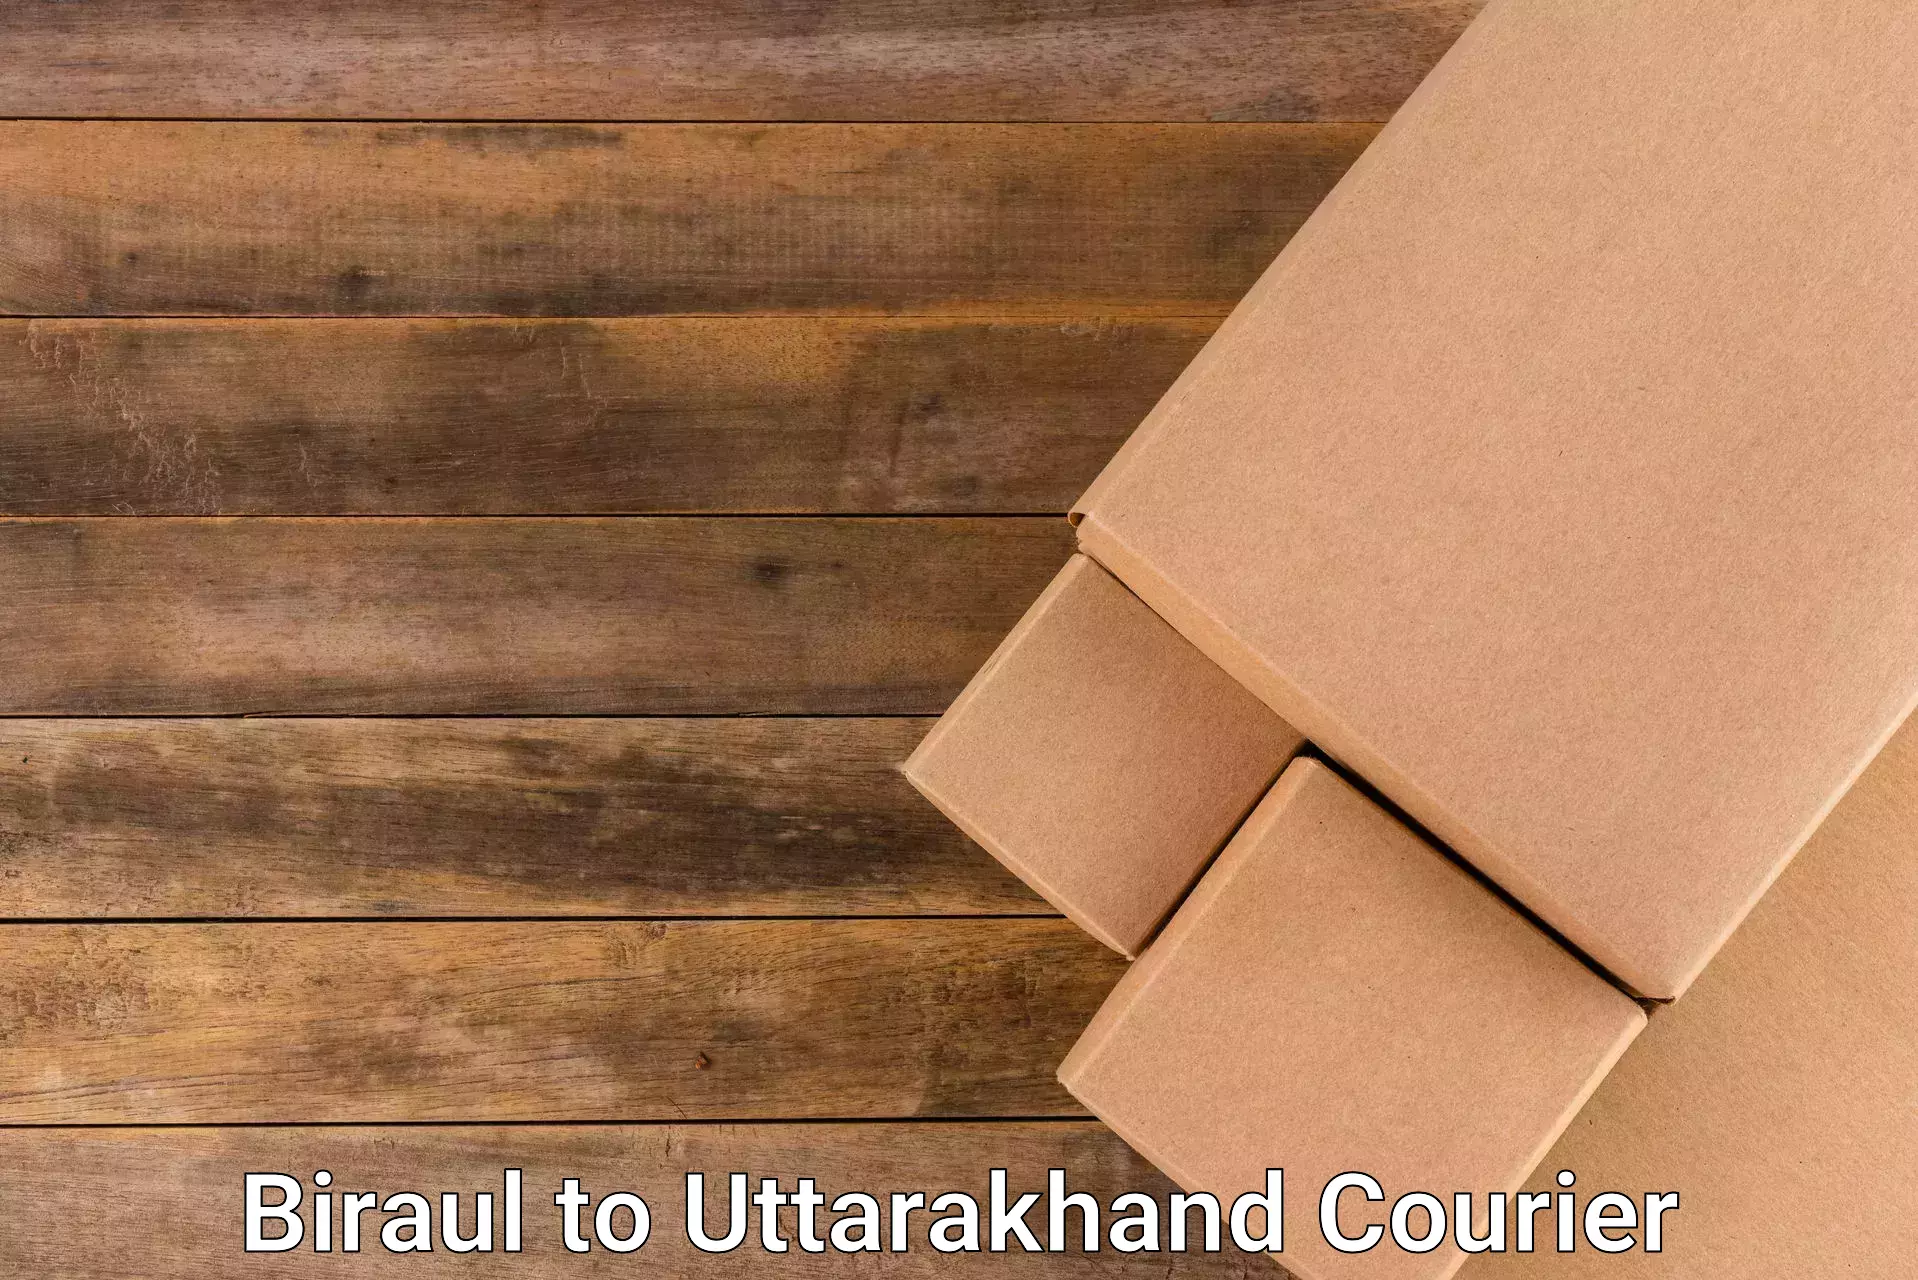 Quality courier partnerships in Biraul to Dehradun